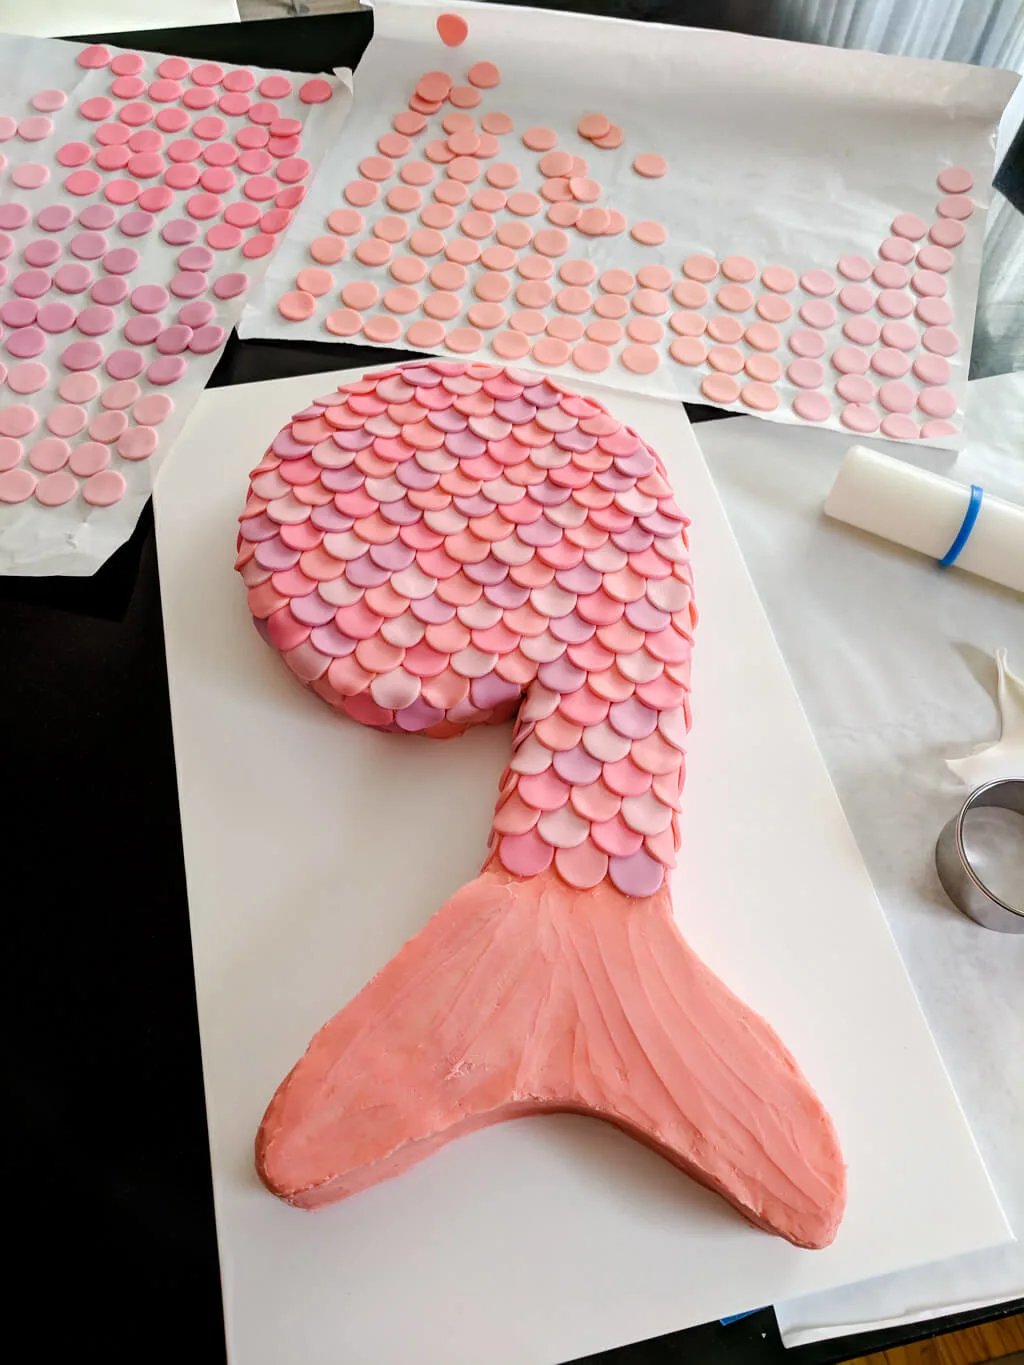 How to make a mermaid birthday cake with fondant scales